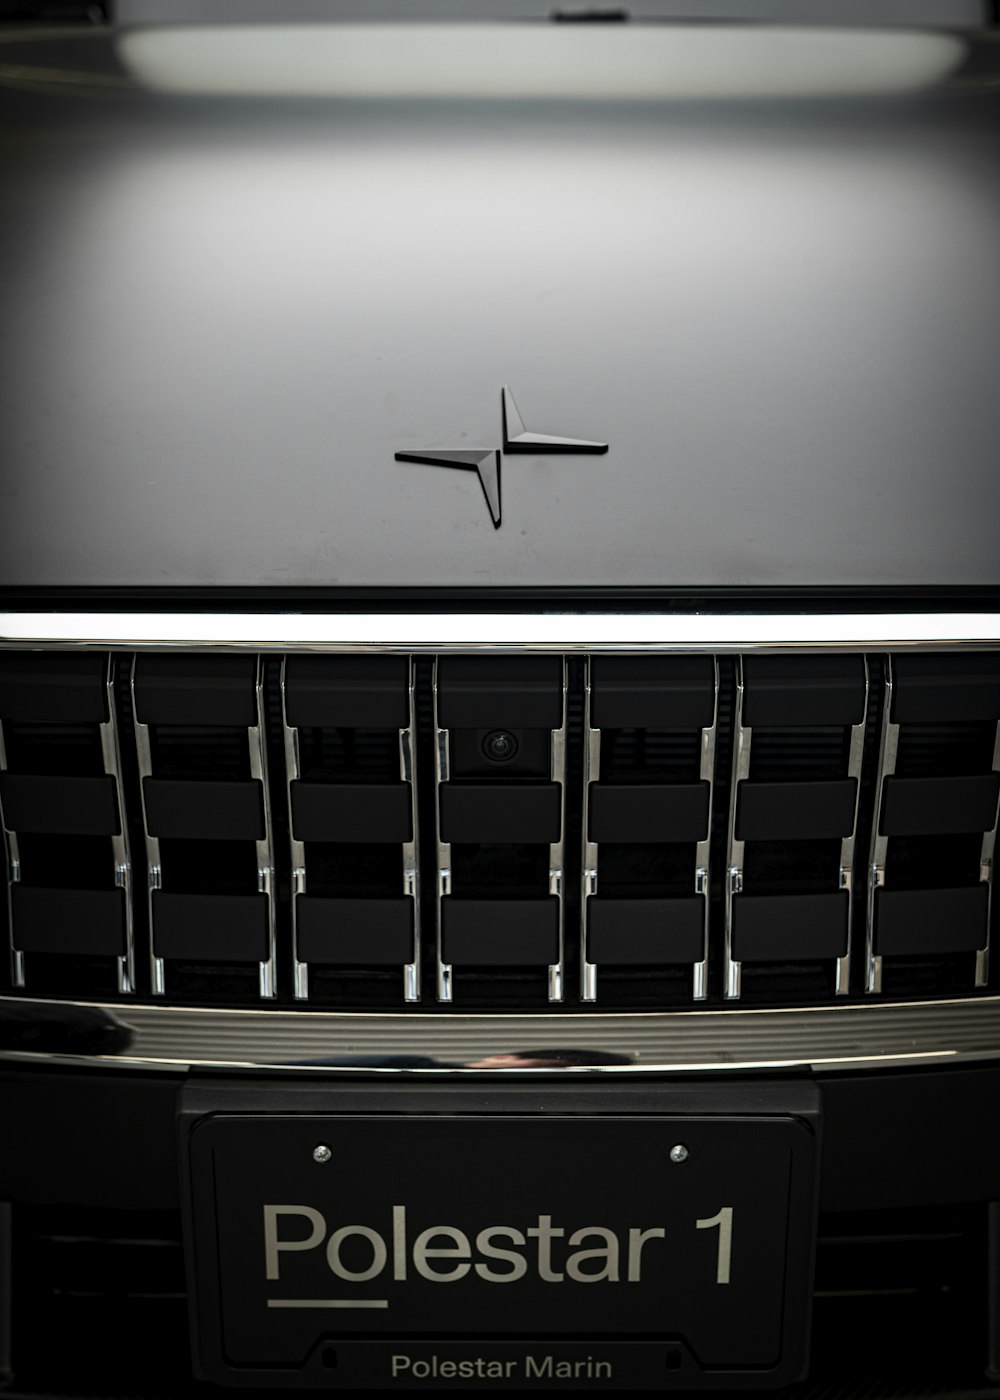 a close up of the front grille of a car